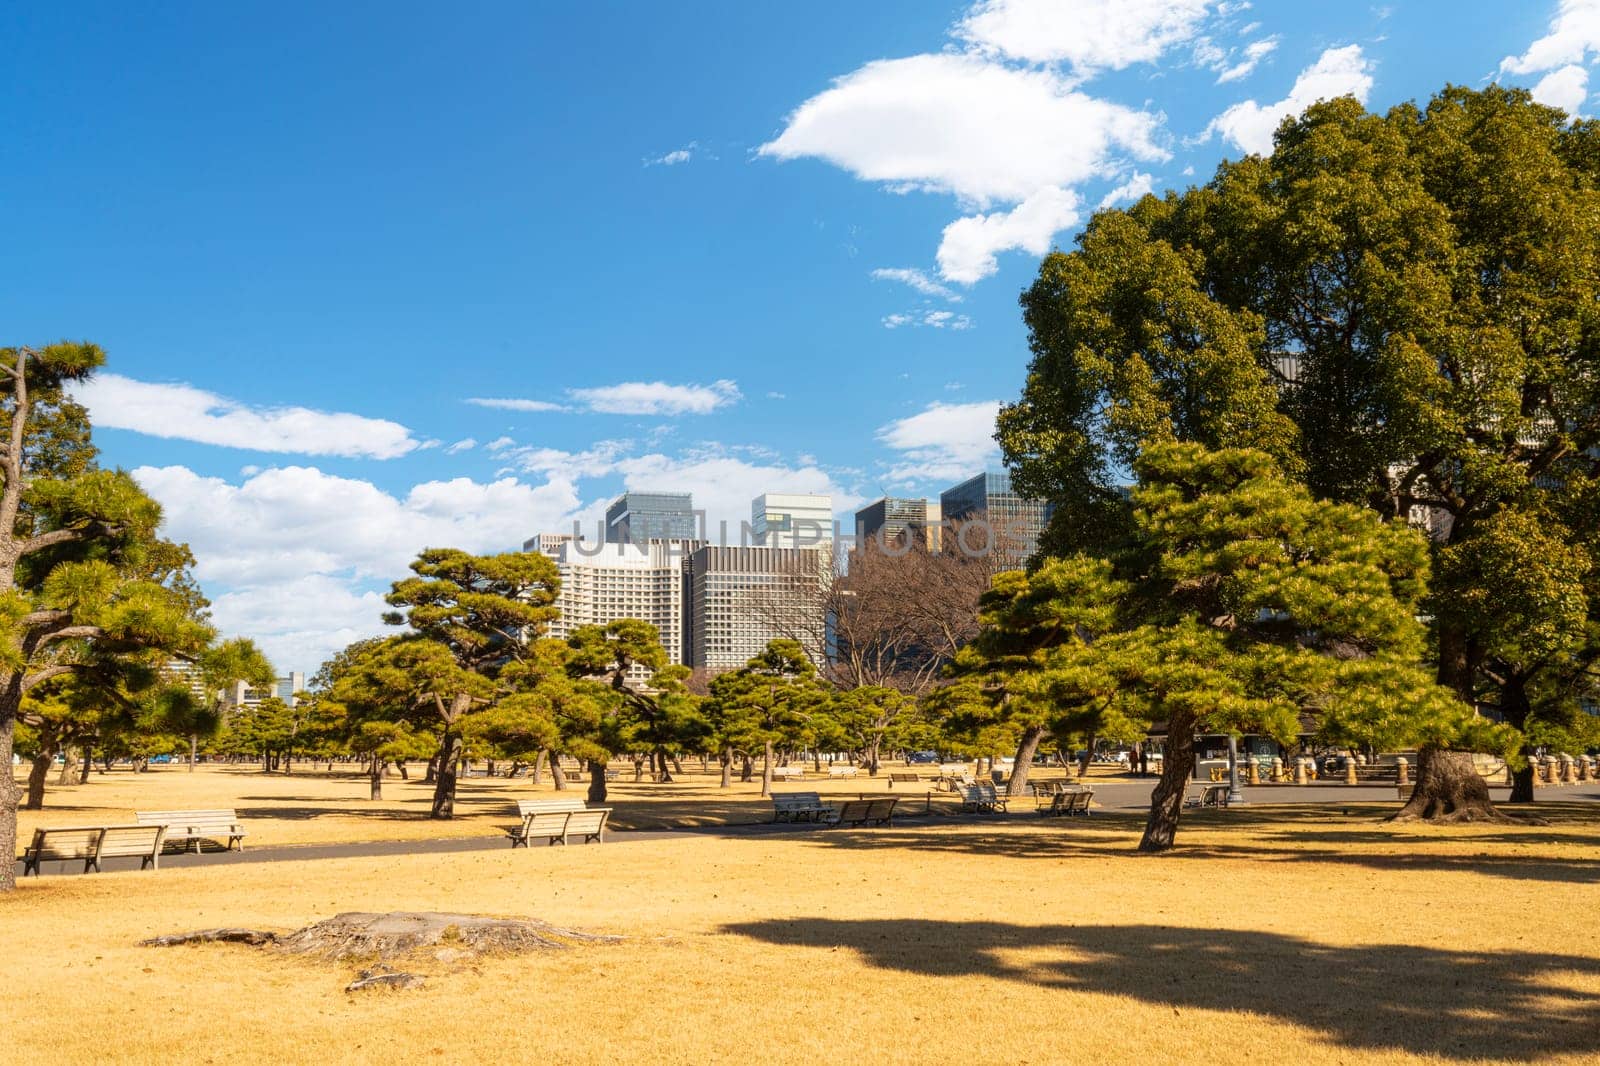 Tokyio, Japan. January 7, 2024.  panoramic view of Kokyo Gaien National Garden in the city center